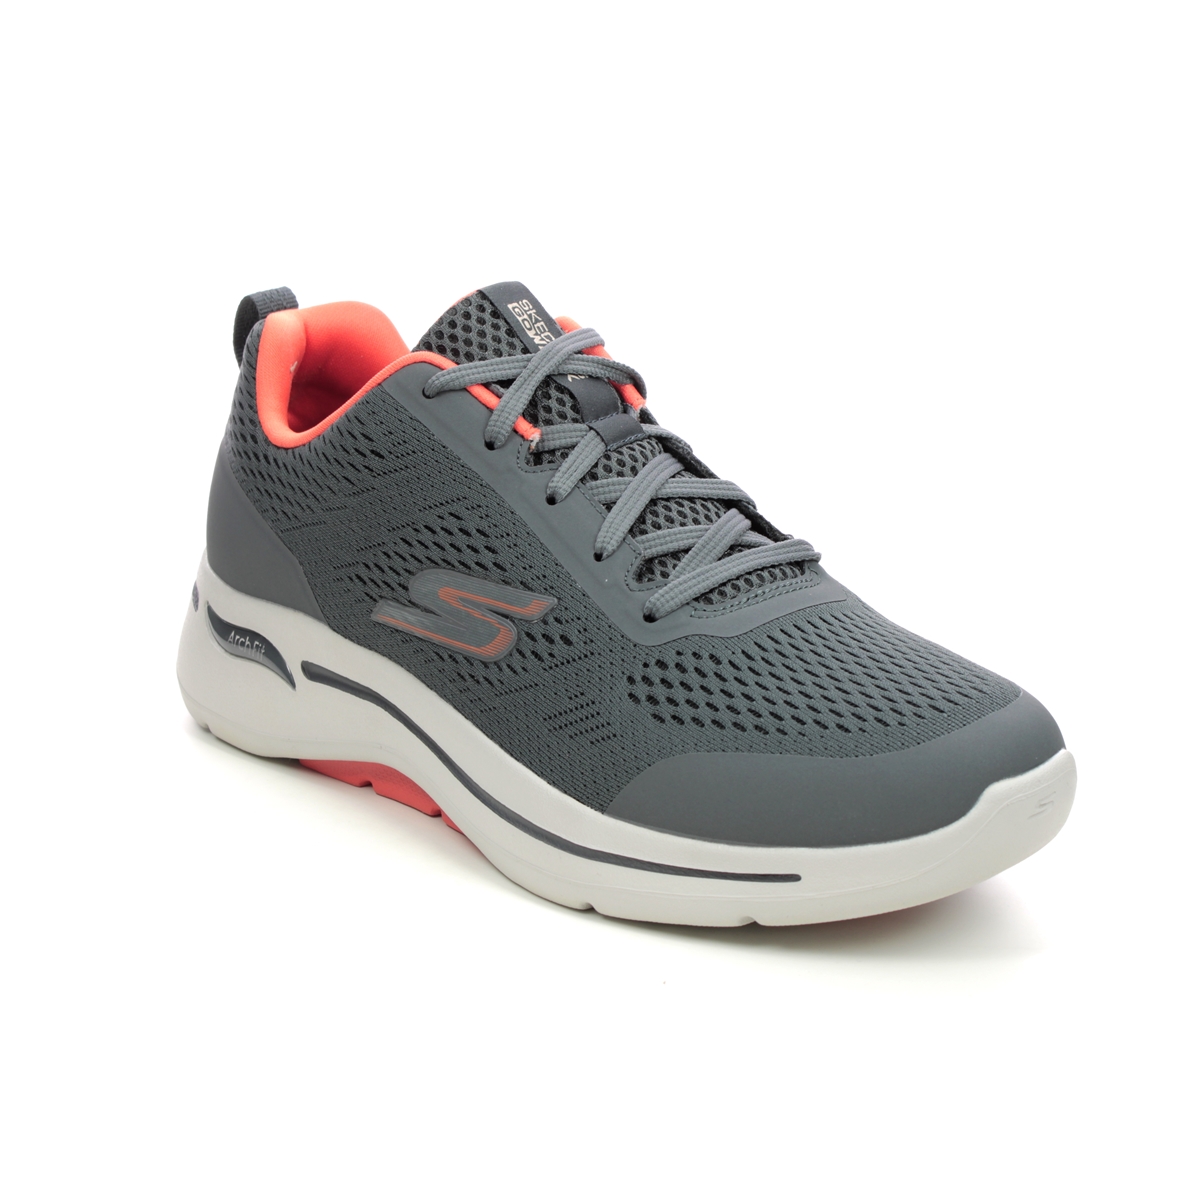 Skechers Arch Fit Go Walk CCOR Charcoal grey Mens trainers 216116 in a Plain Man-made in Size 10